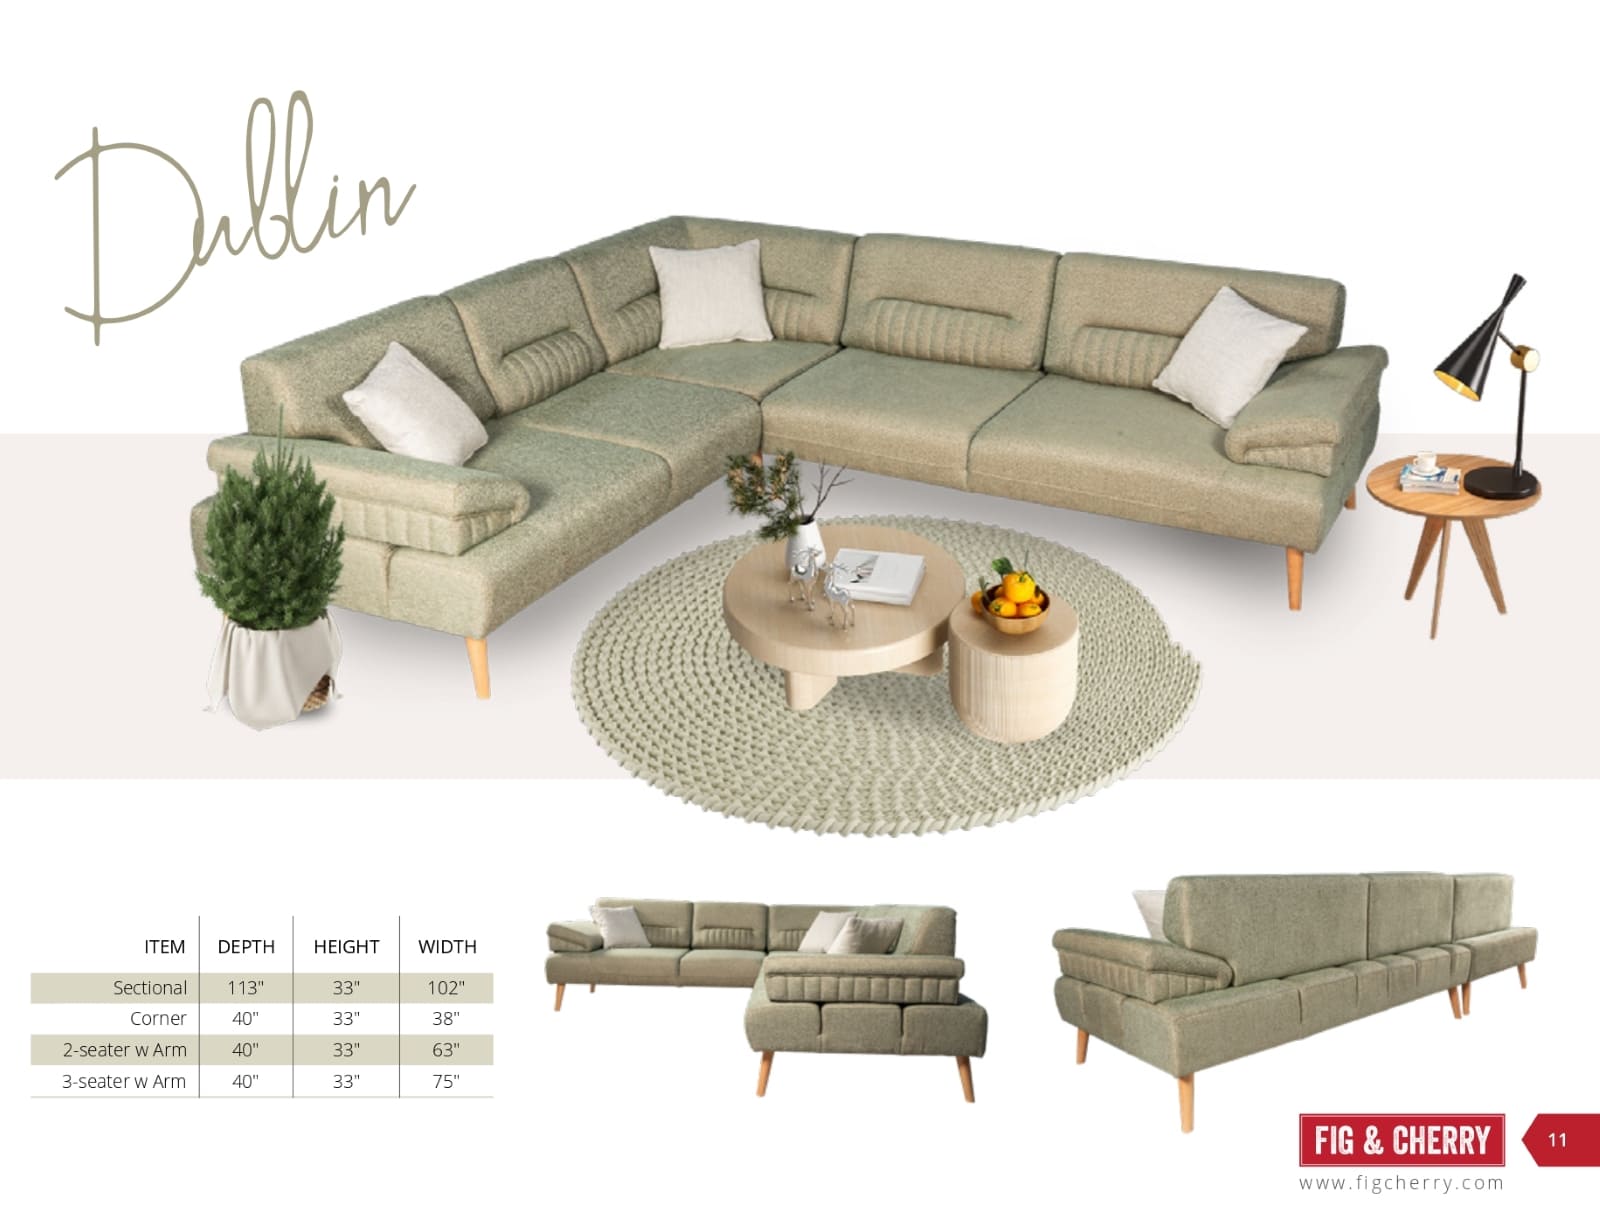 Fig & Cherry Indoor Collection (Sofas and Sectionals) Catalog (11)